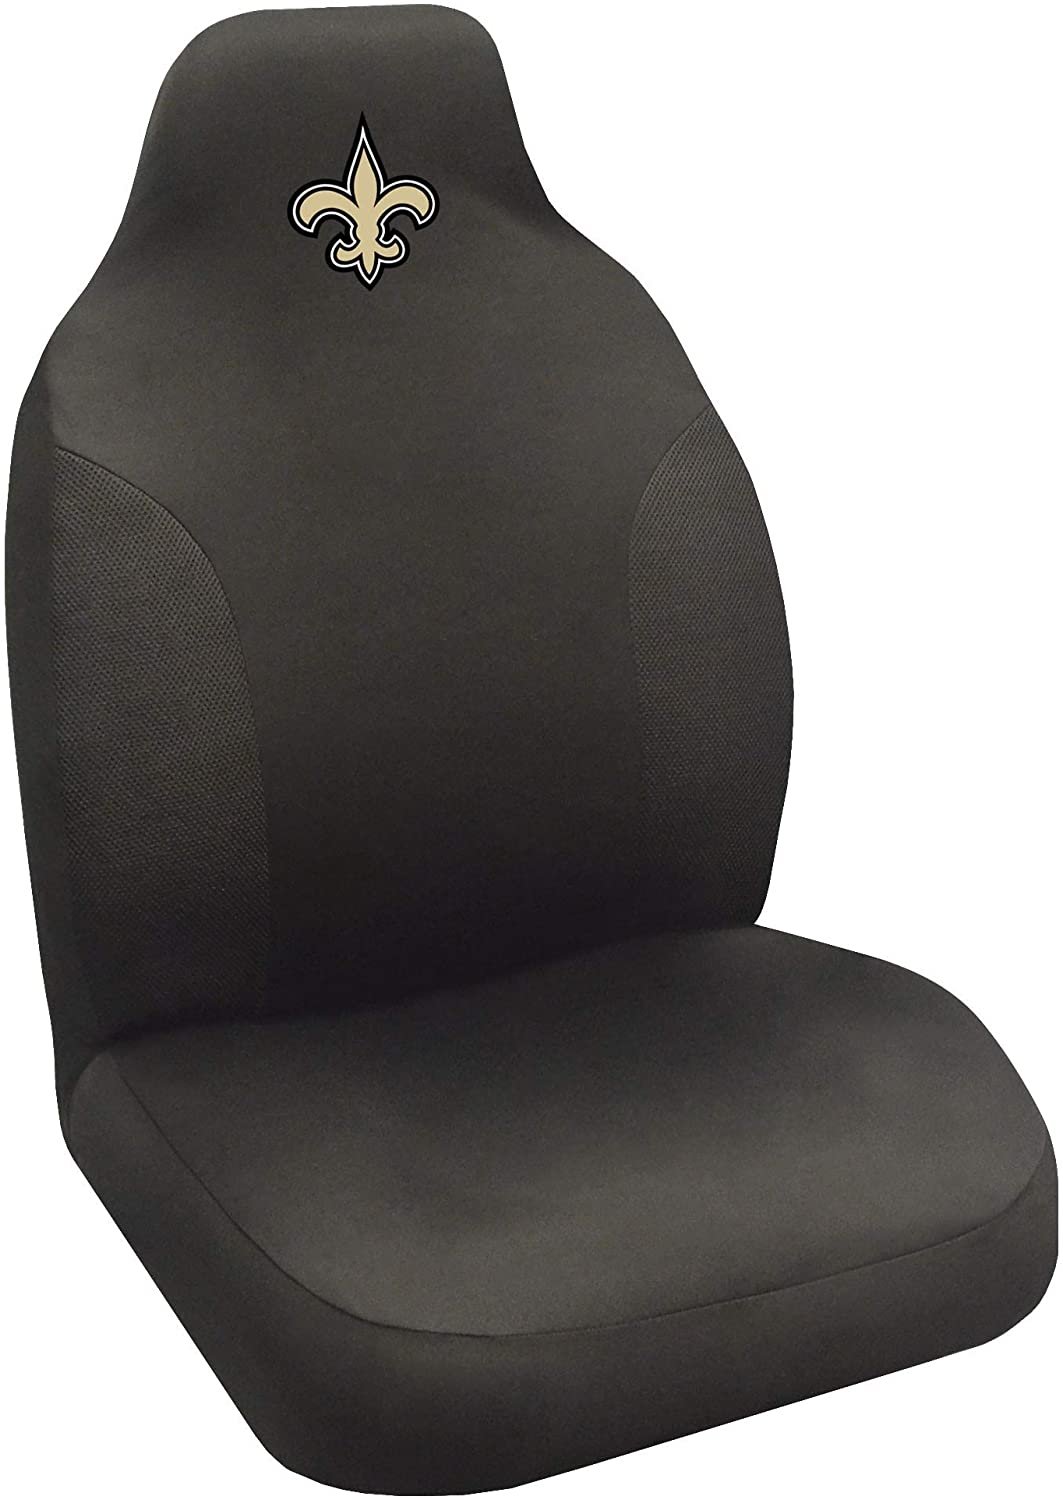 New Orleans Saints Embroidered Seat Cover, Black, 20"x48"